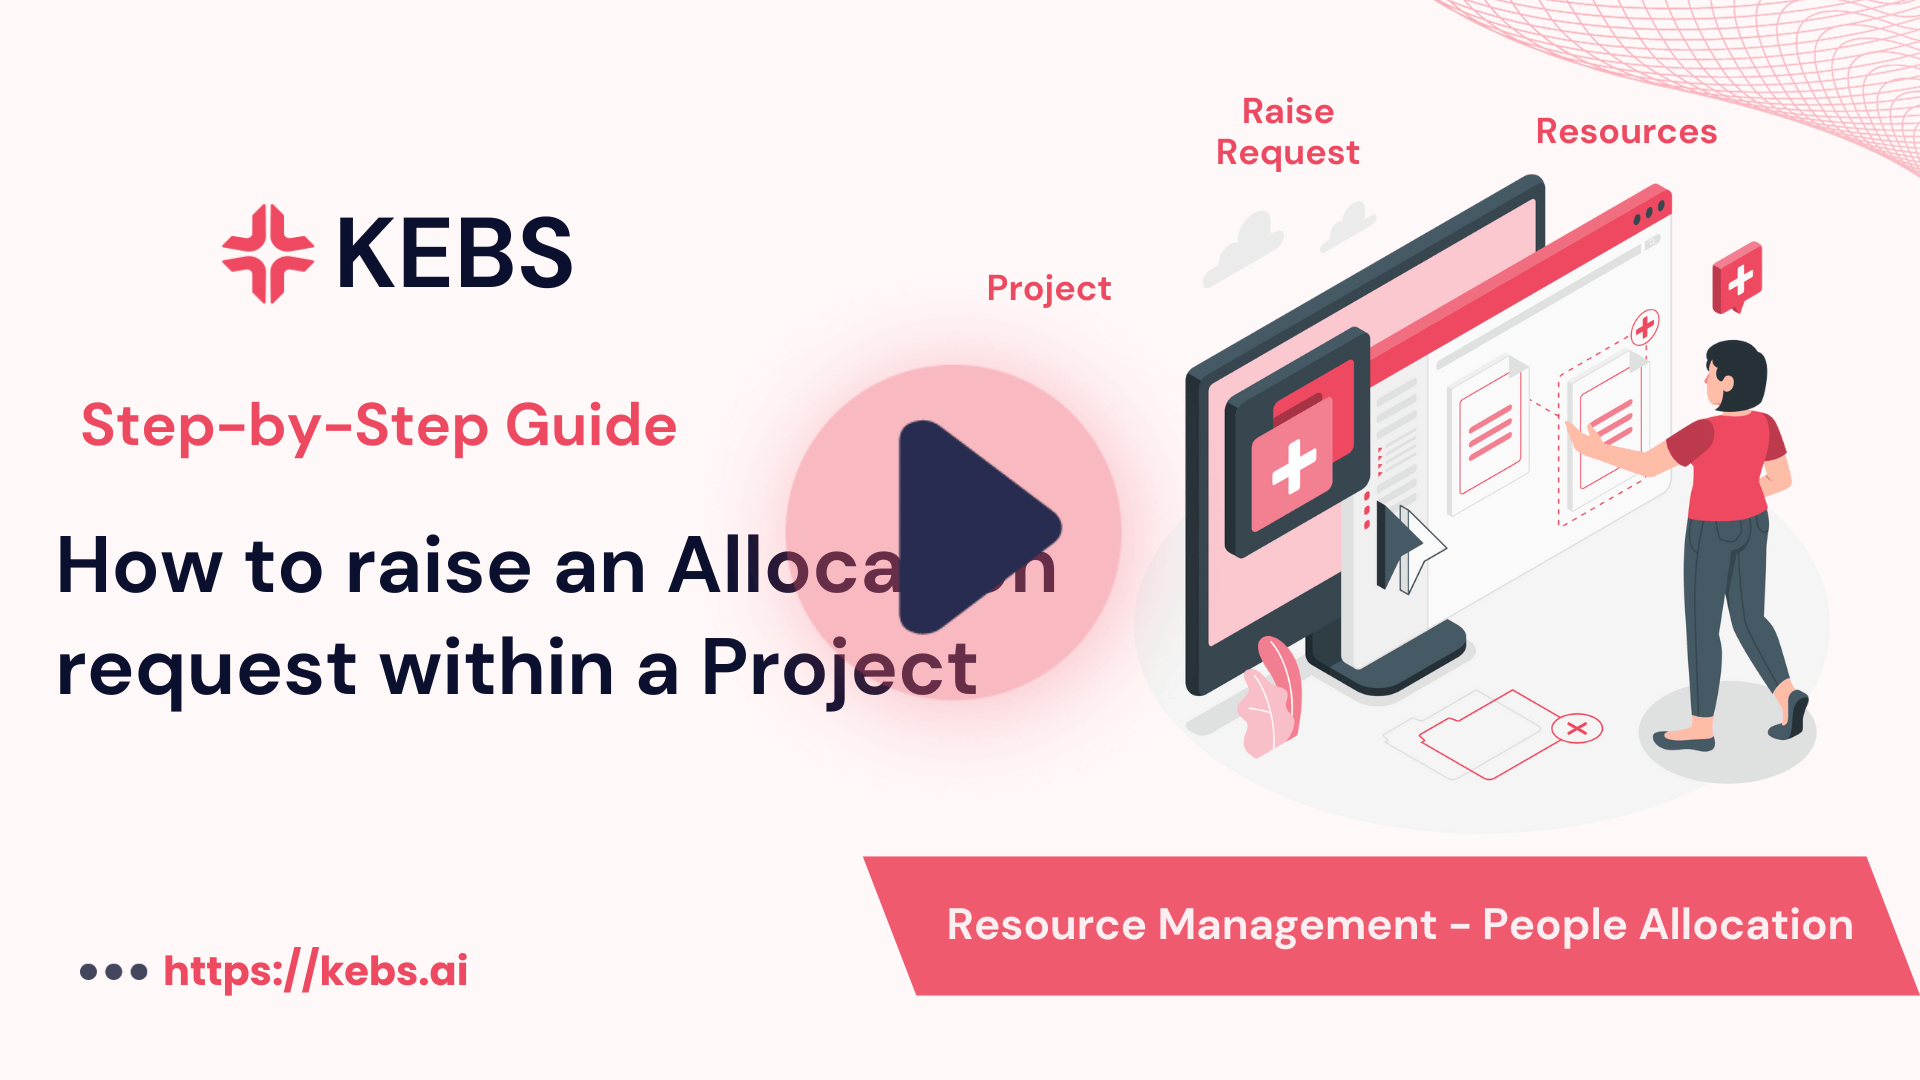 How to raise an Allocation request within a Project